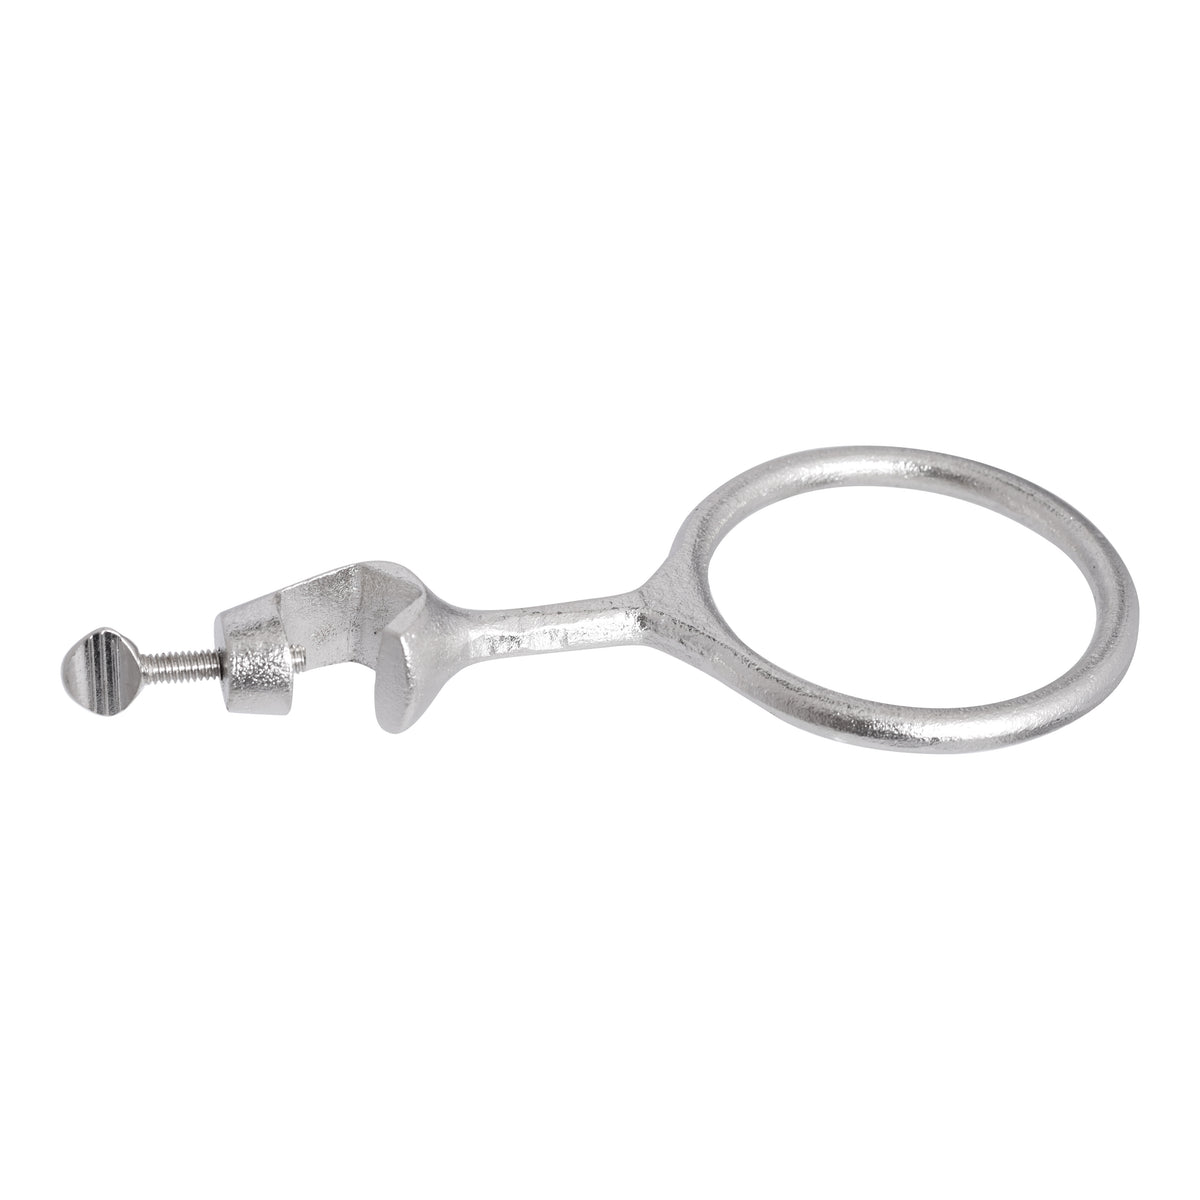 Eisco labs Closed Ring Clamp ID 2.5 with Boss head clamp - 5